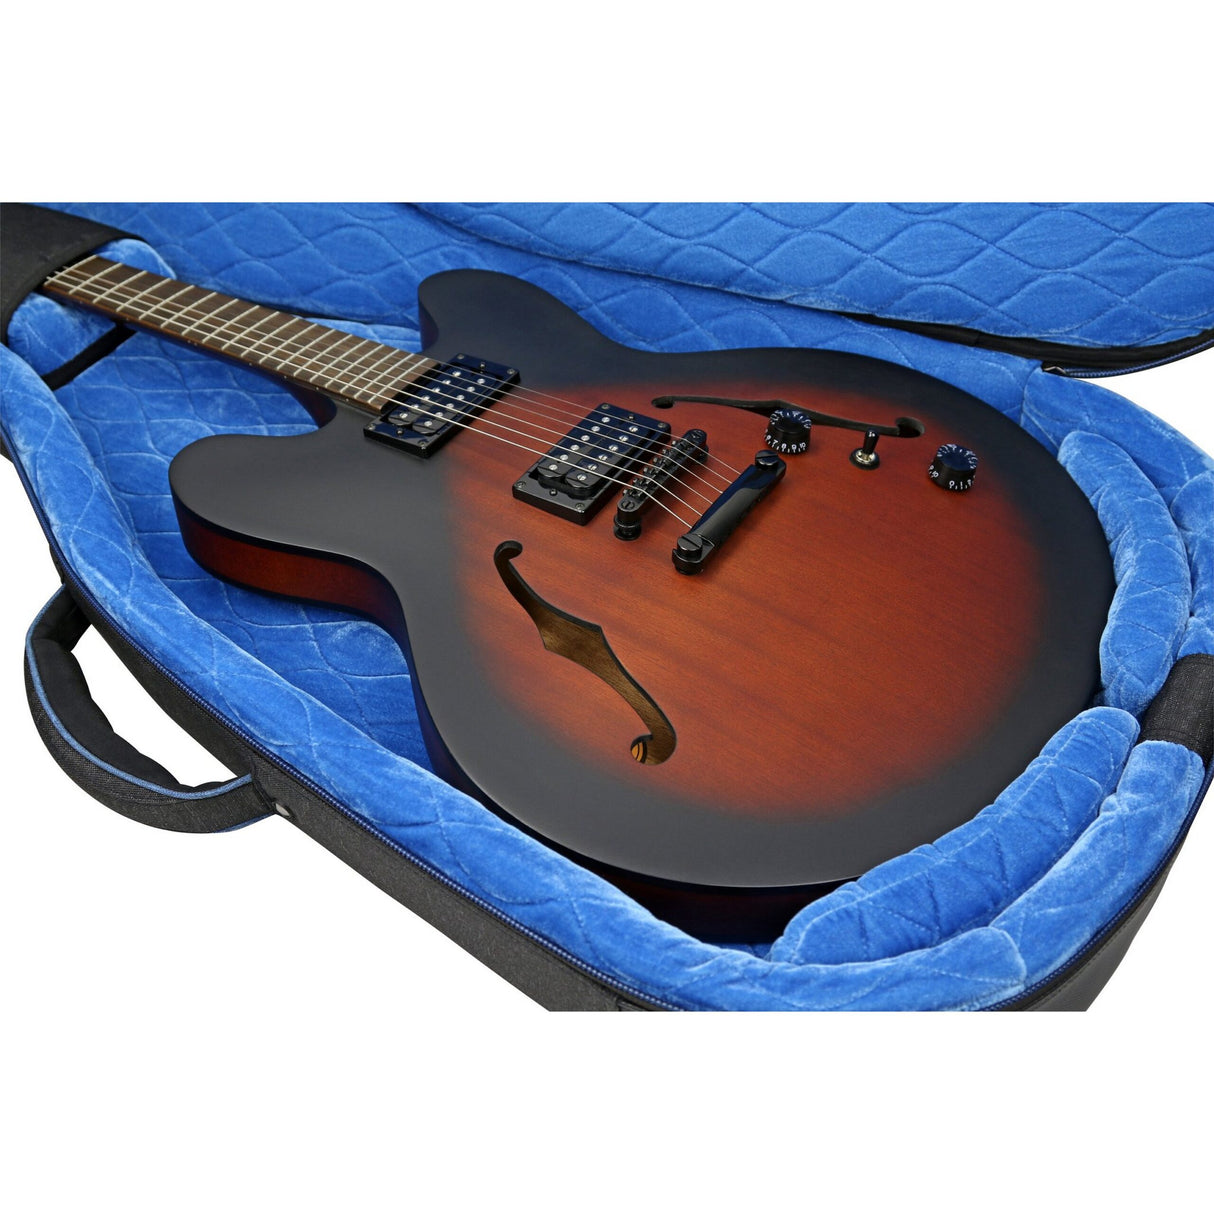 Reunion Blues RBCSH RB Continental Voyager Semi/Hollow Body Electric Guitar Case